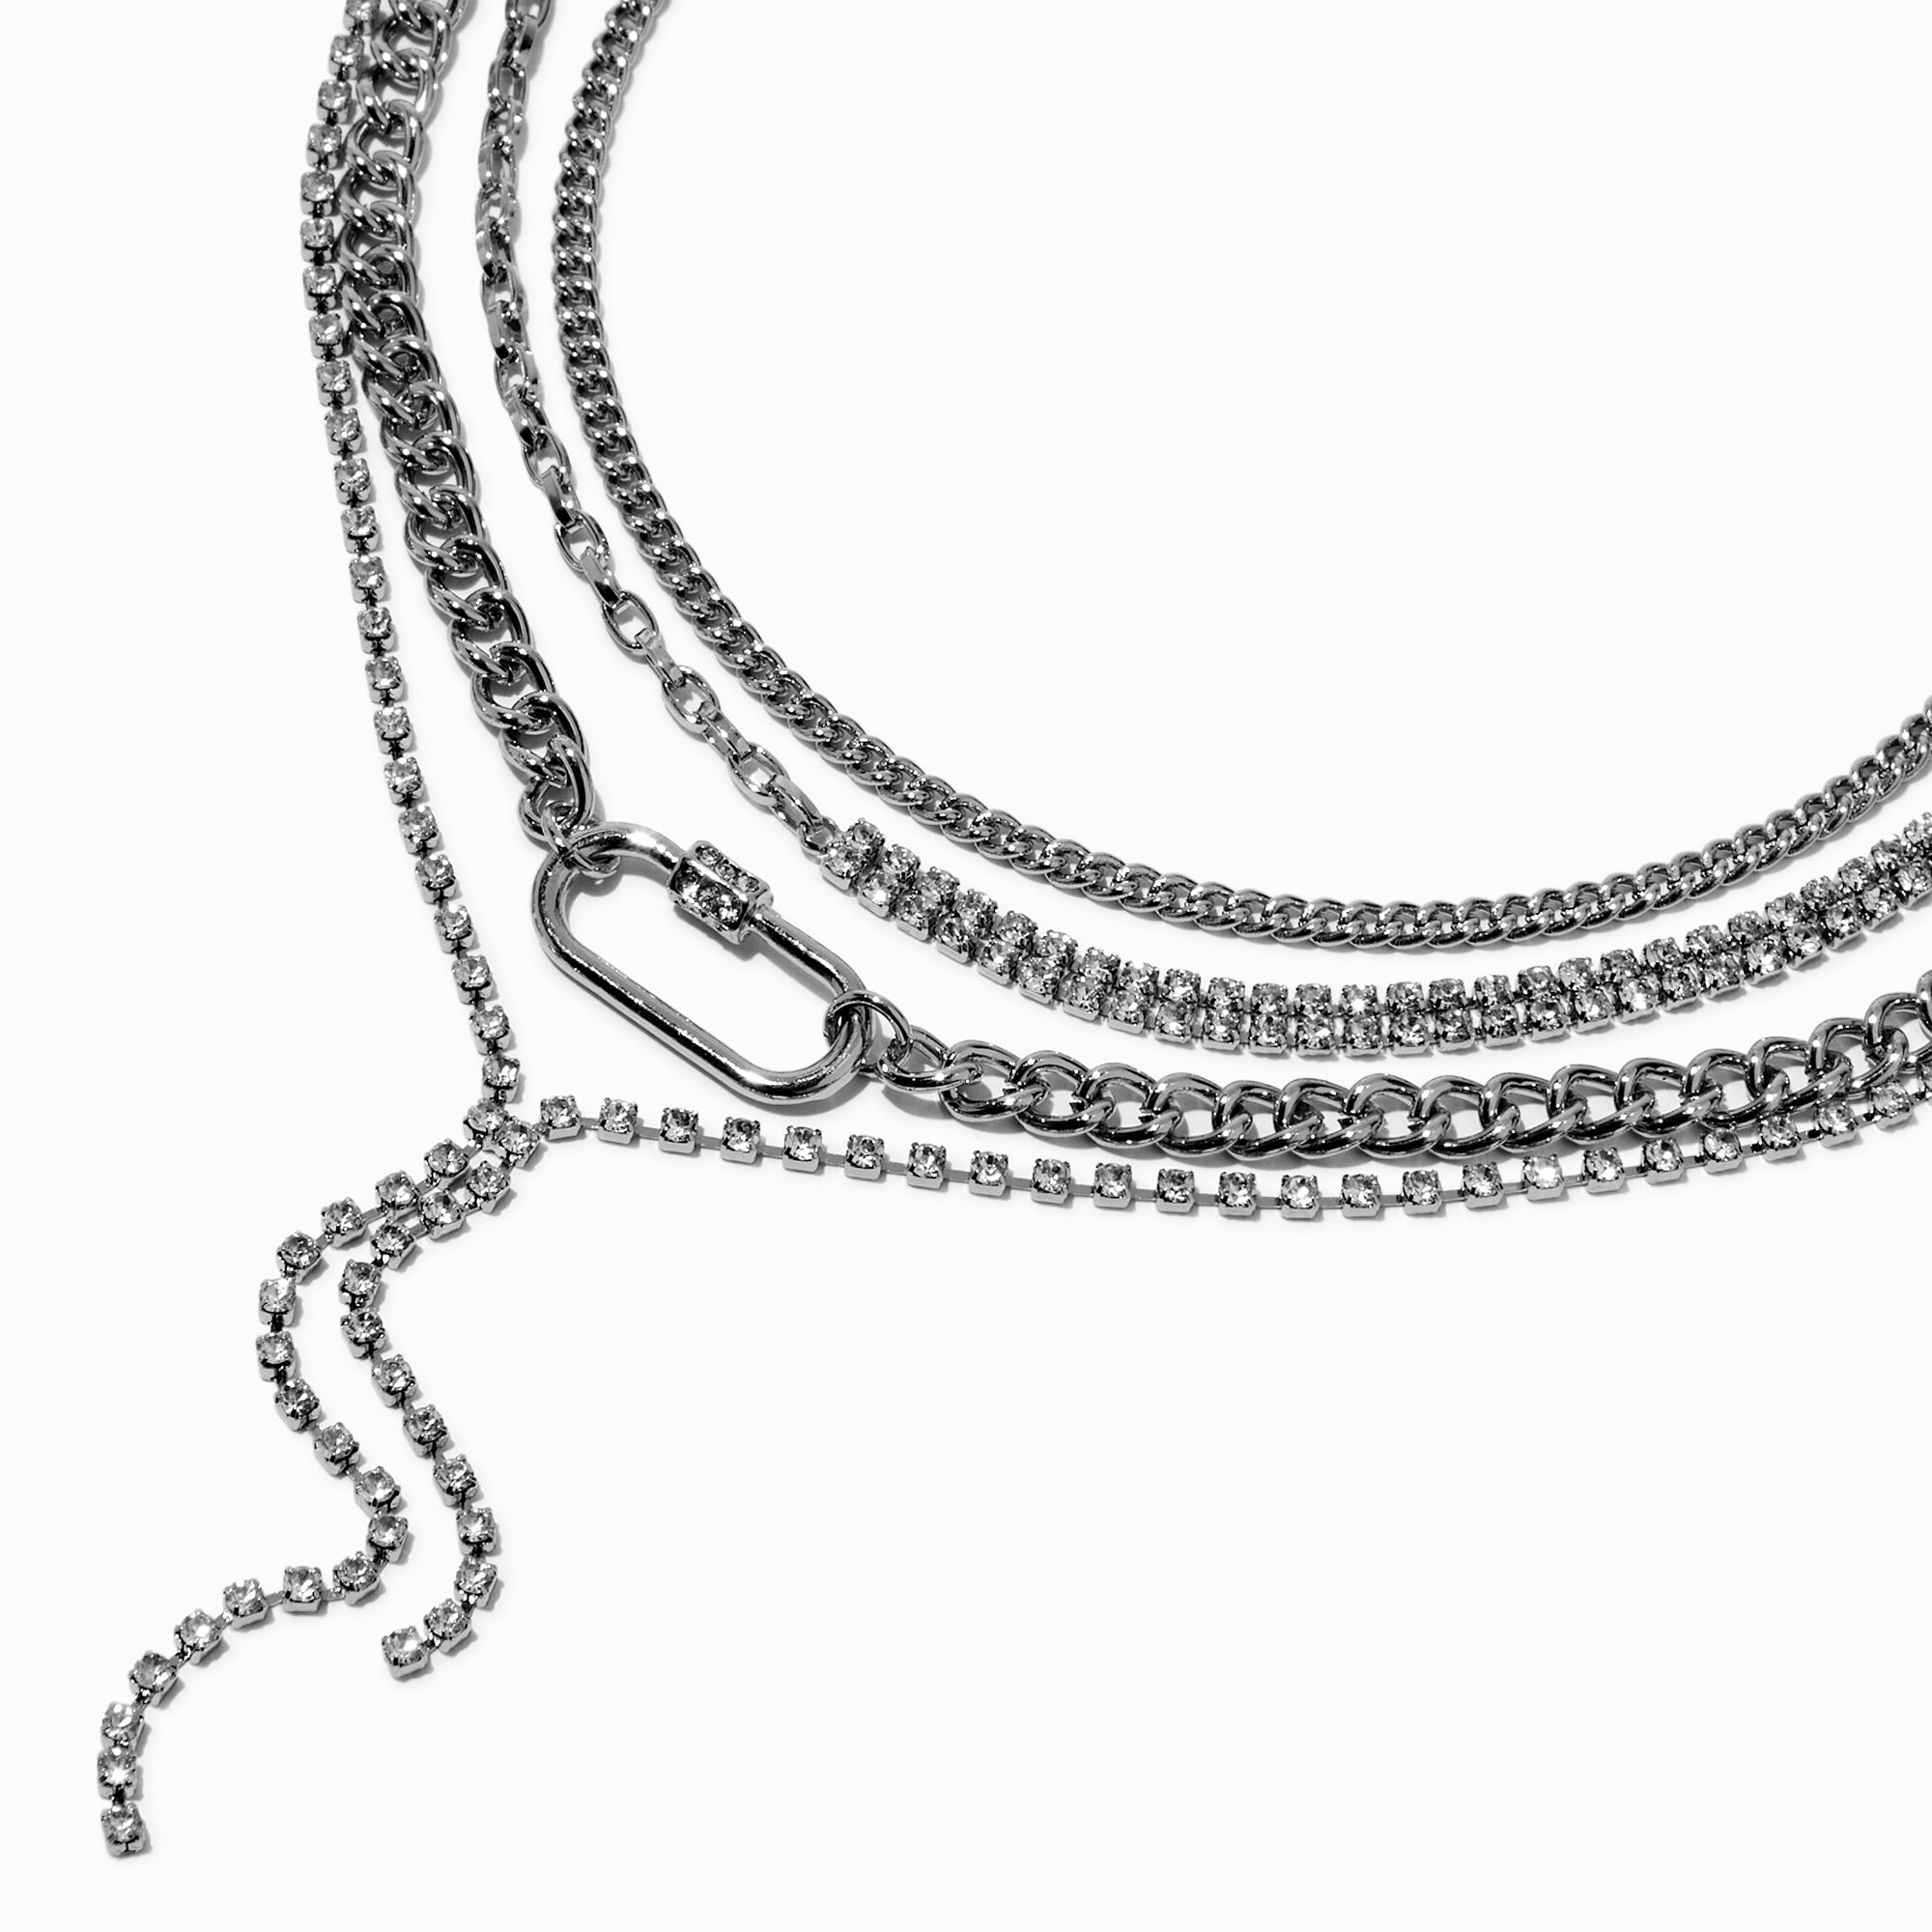 View Claires Tone Stone Carabiner MultiStrand YNeck Necklace Silver information